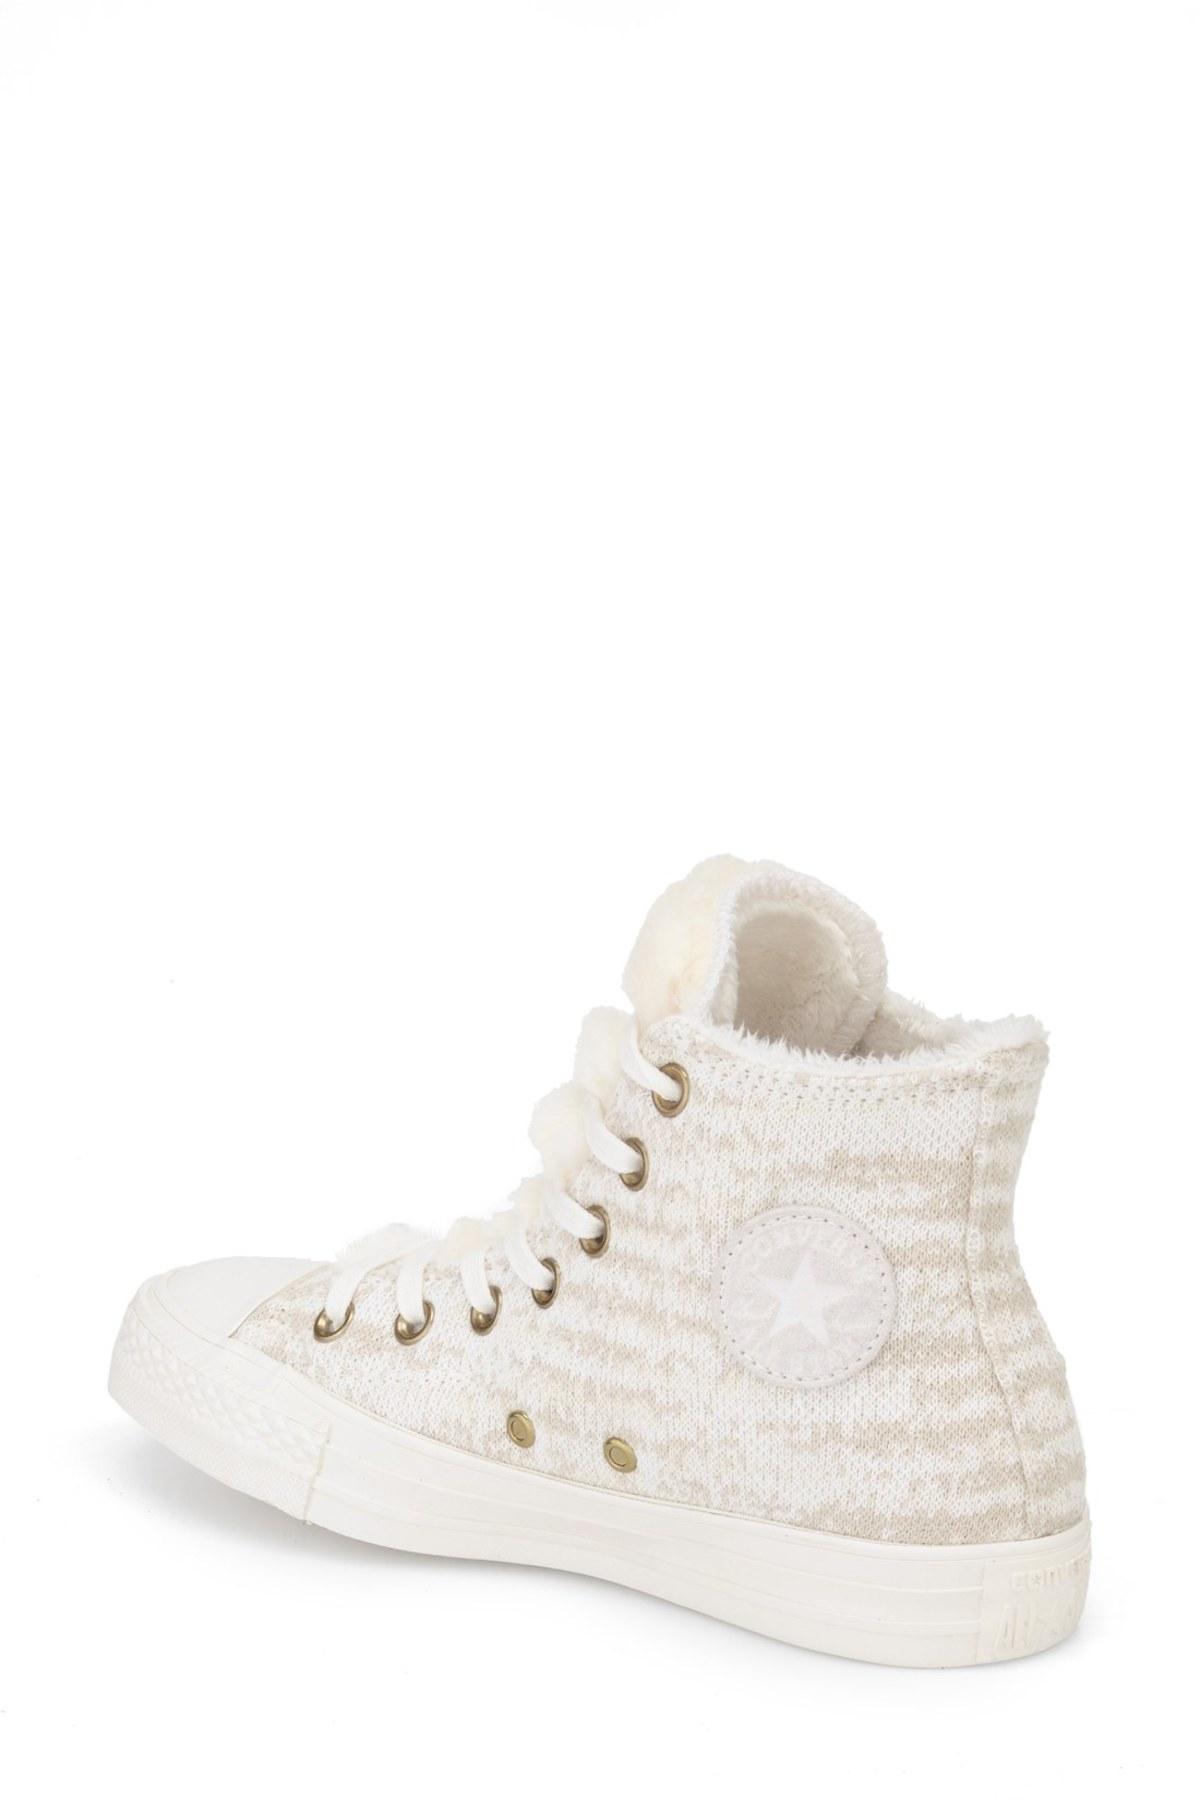 Converse Chuck Taylor(r) All Star(r) Winter Faux Fur Lined Knit High Top  (women) in White | Lyst